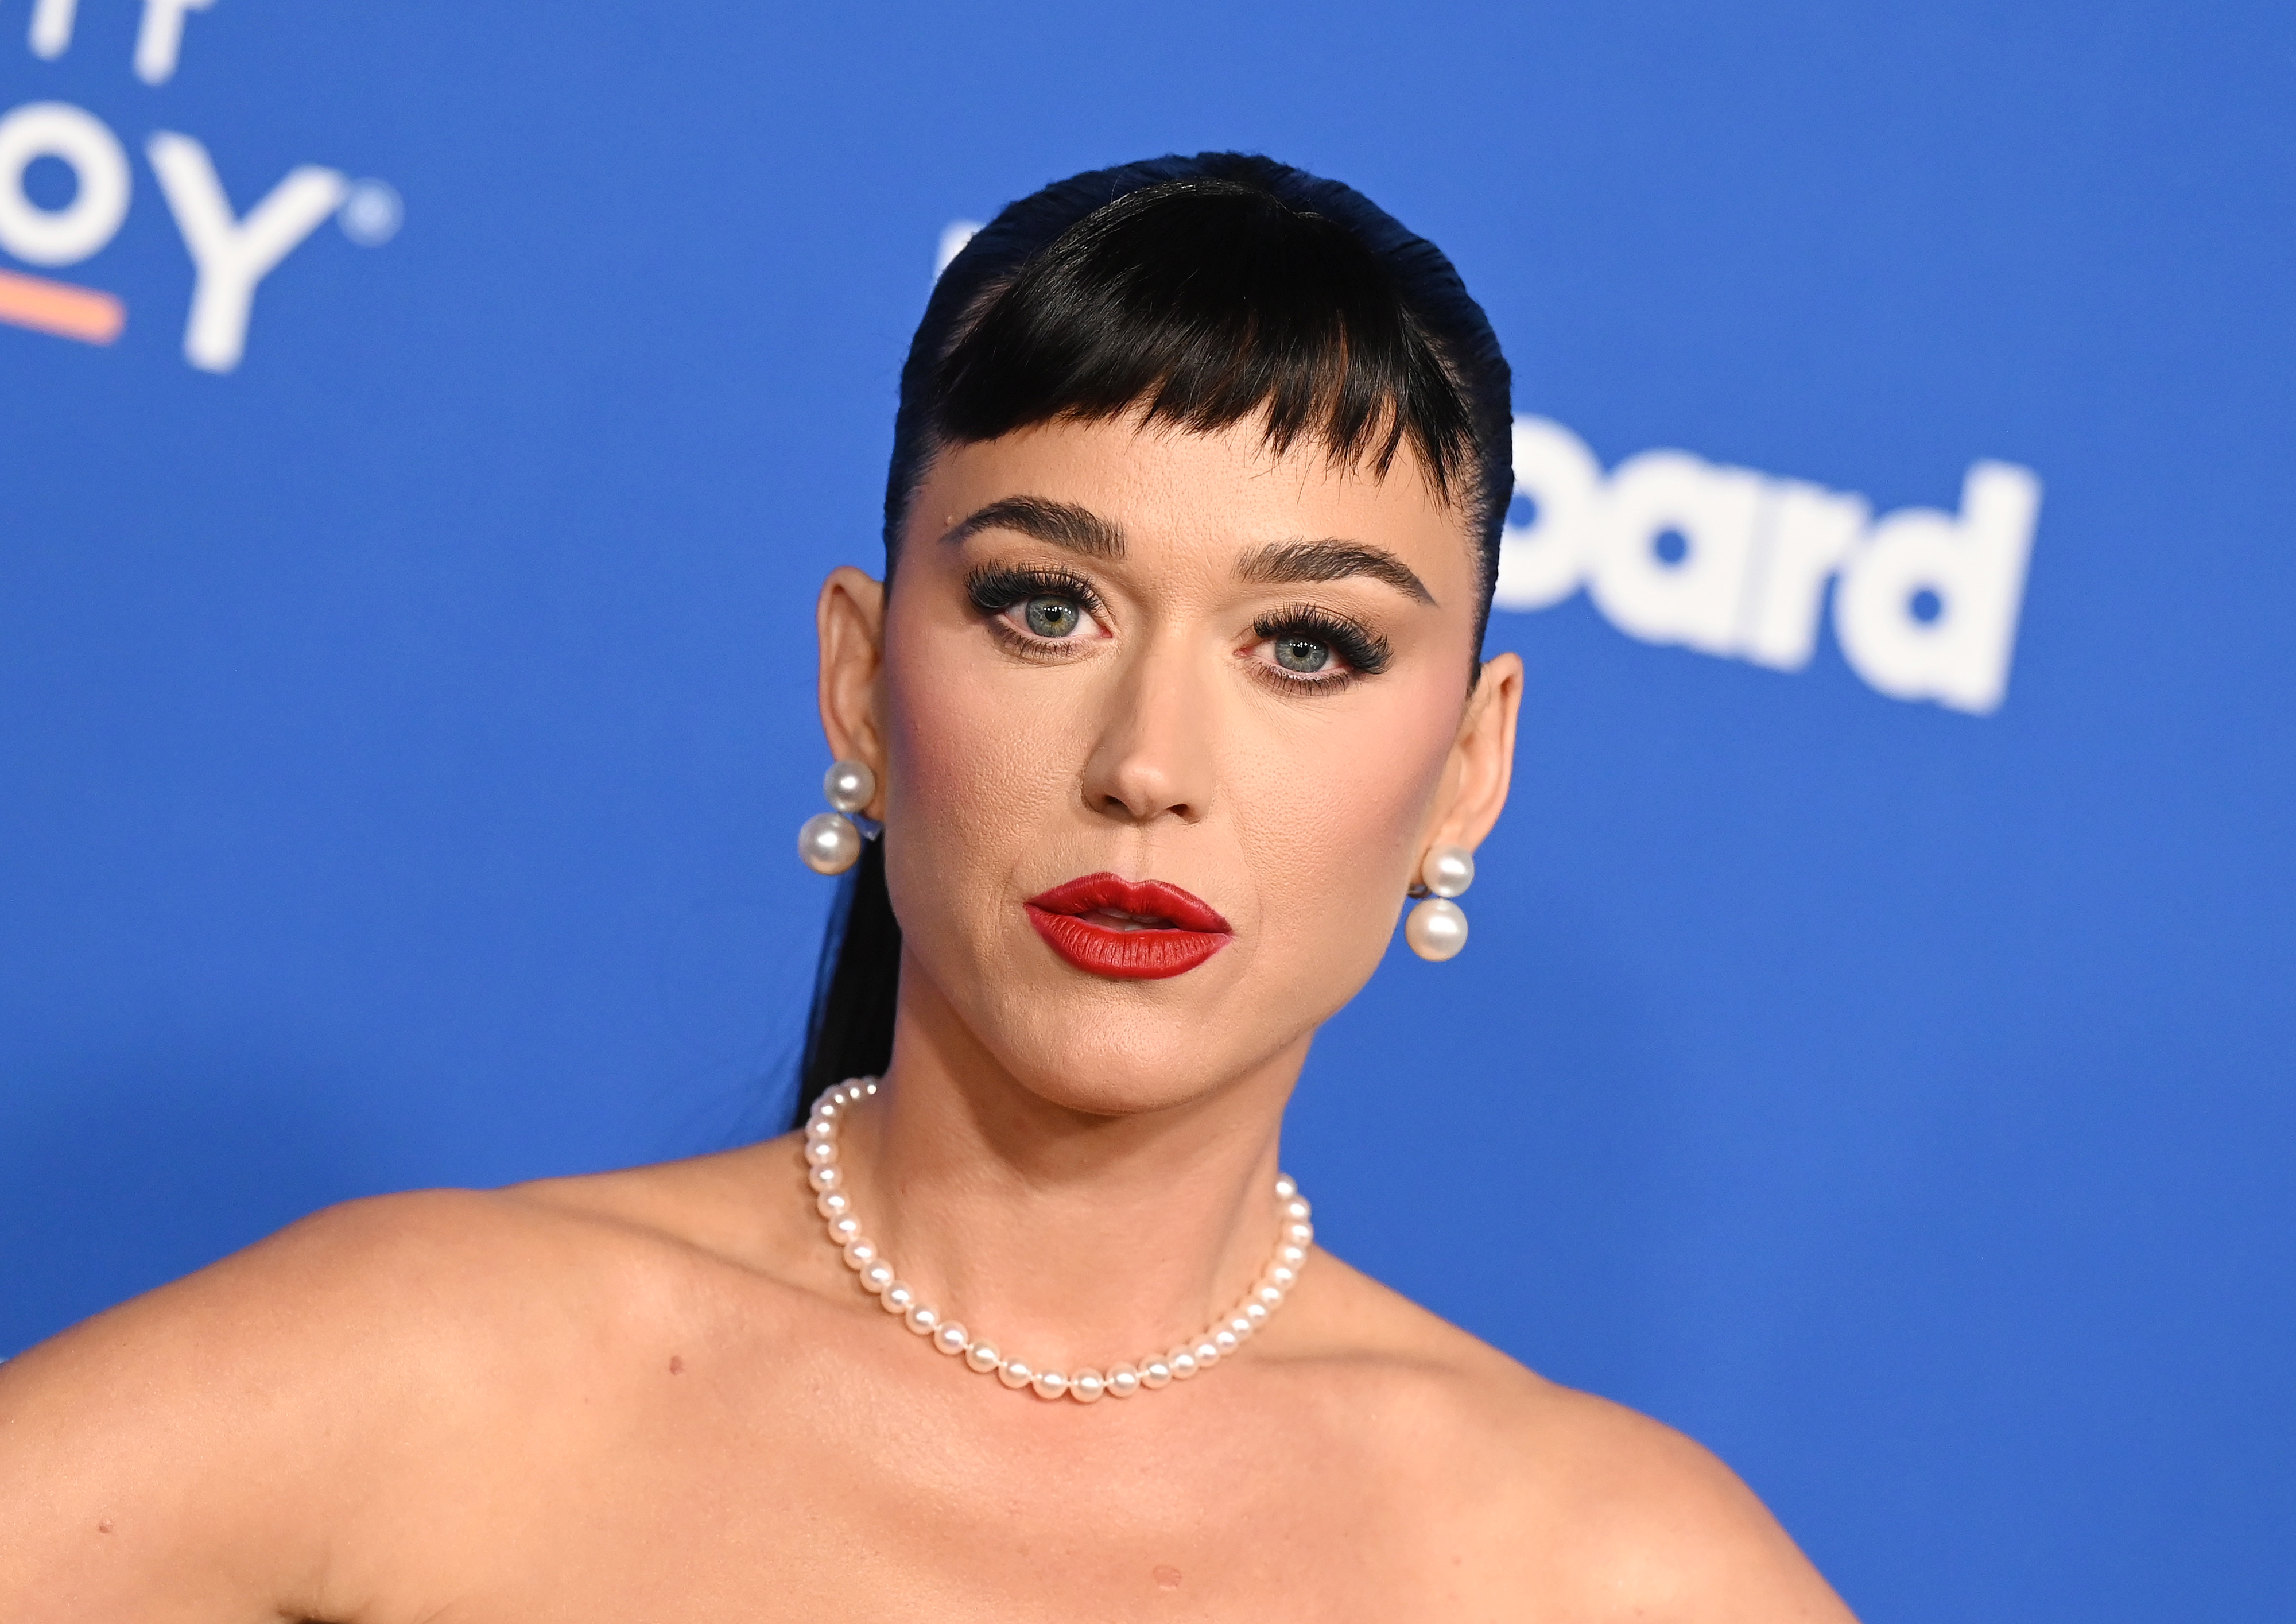 Katy posing on at a media event, wearing a pearl necklace and earrings, with bold lipstick